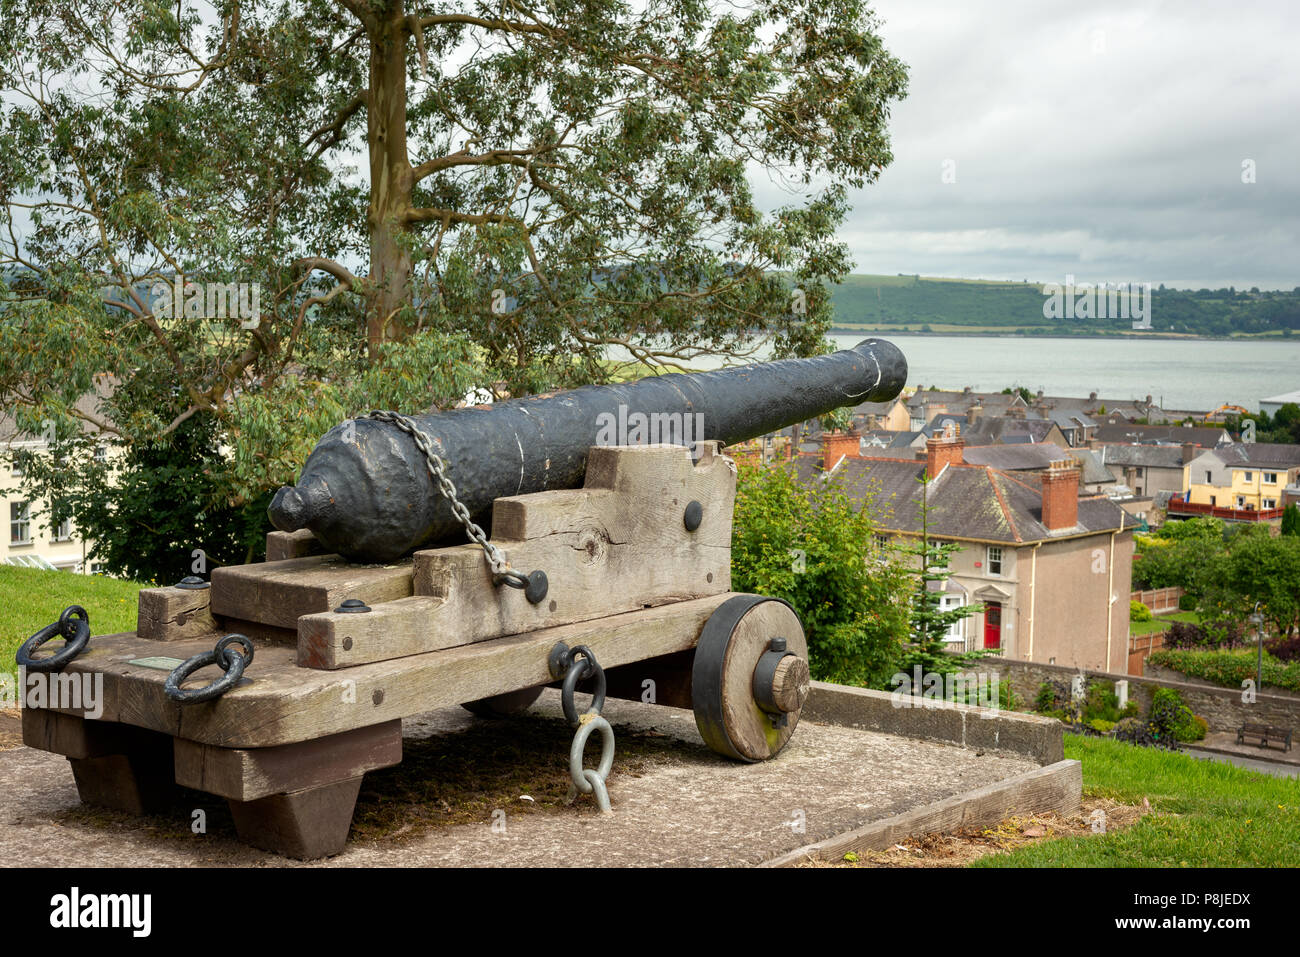 Old Gun Cannon located at College Gardens in the Raleigh Quarter, overlooking the town and the River Blackwater in Youghal, Ireland Stock Photo